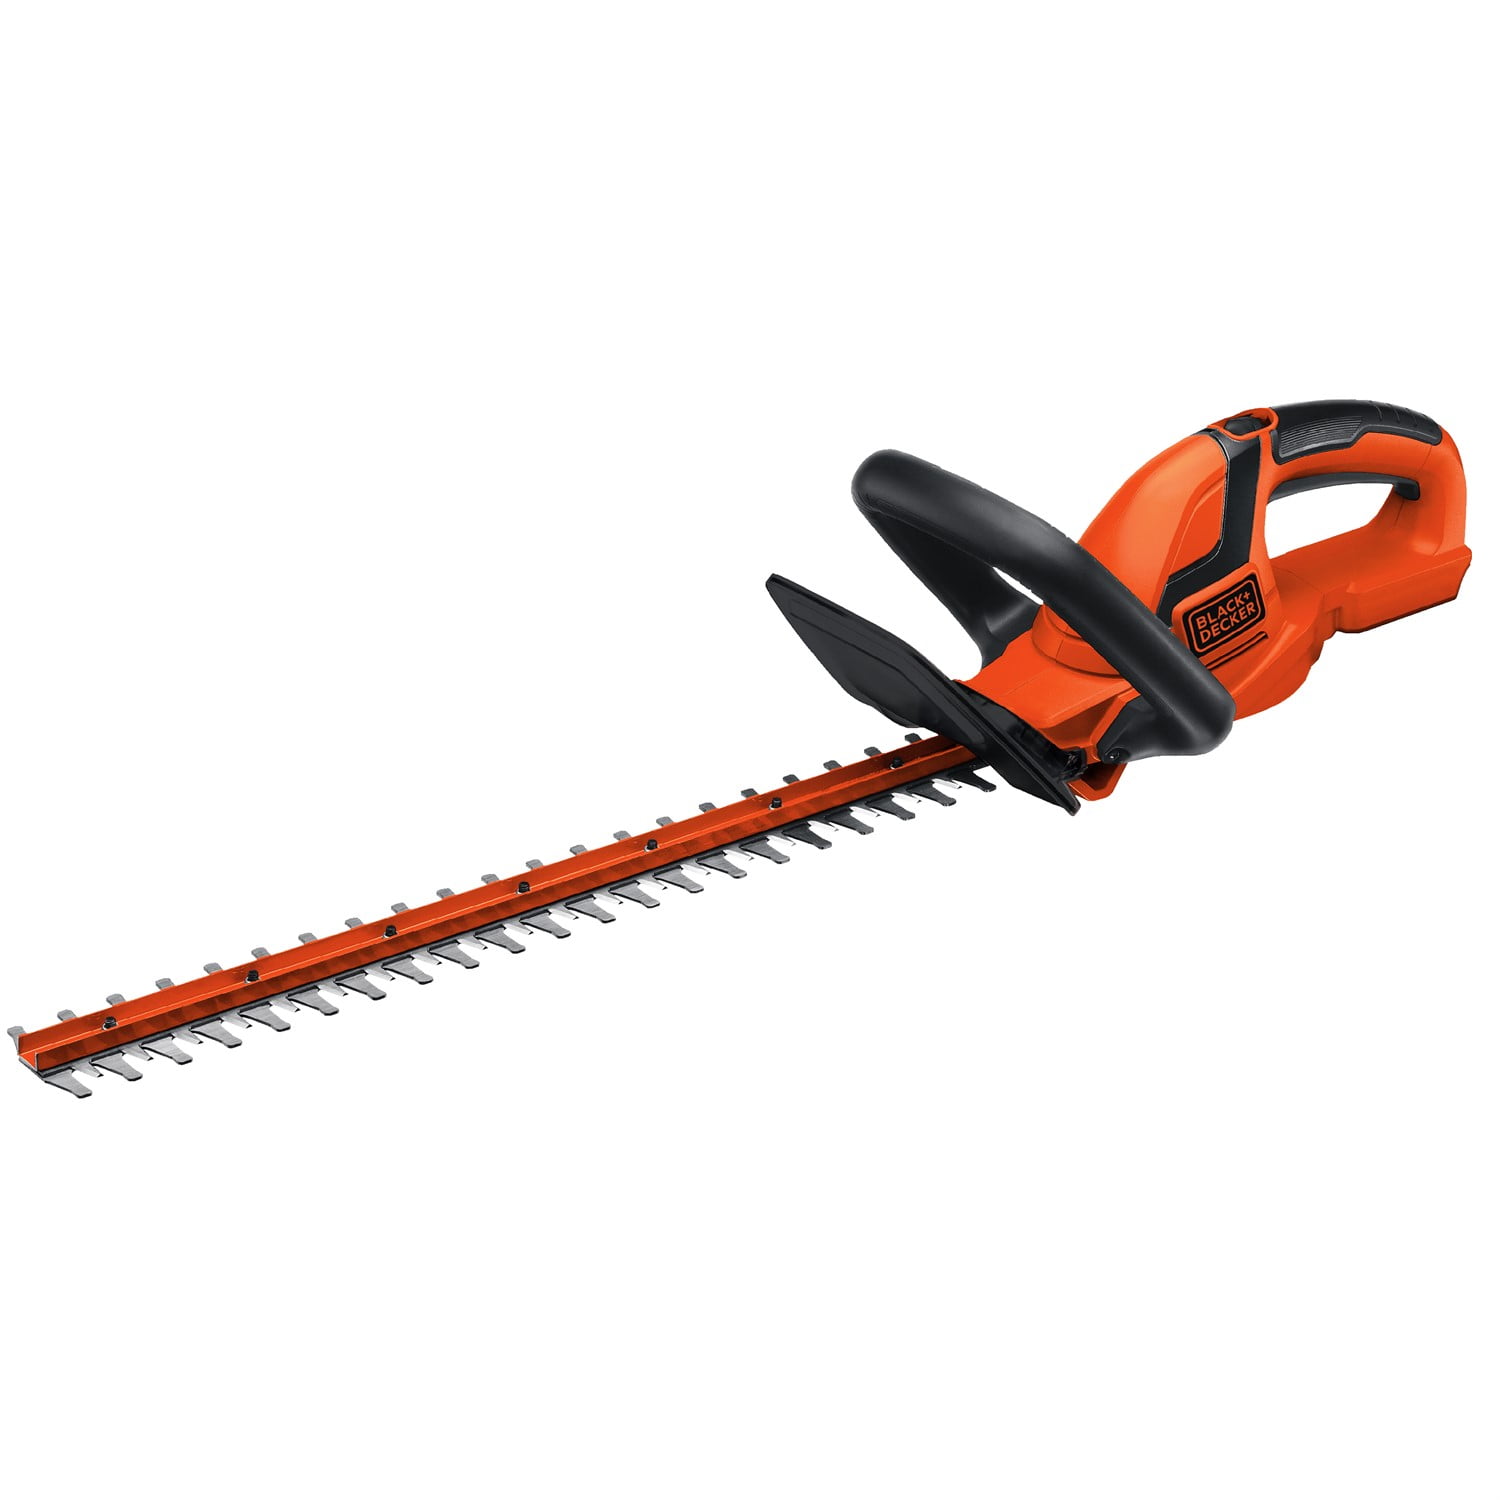 BLACK AND DECKER Hedge Trimmer 'Press for on' switch with Blade Brake  